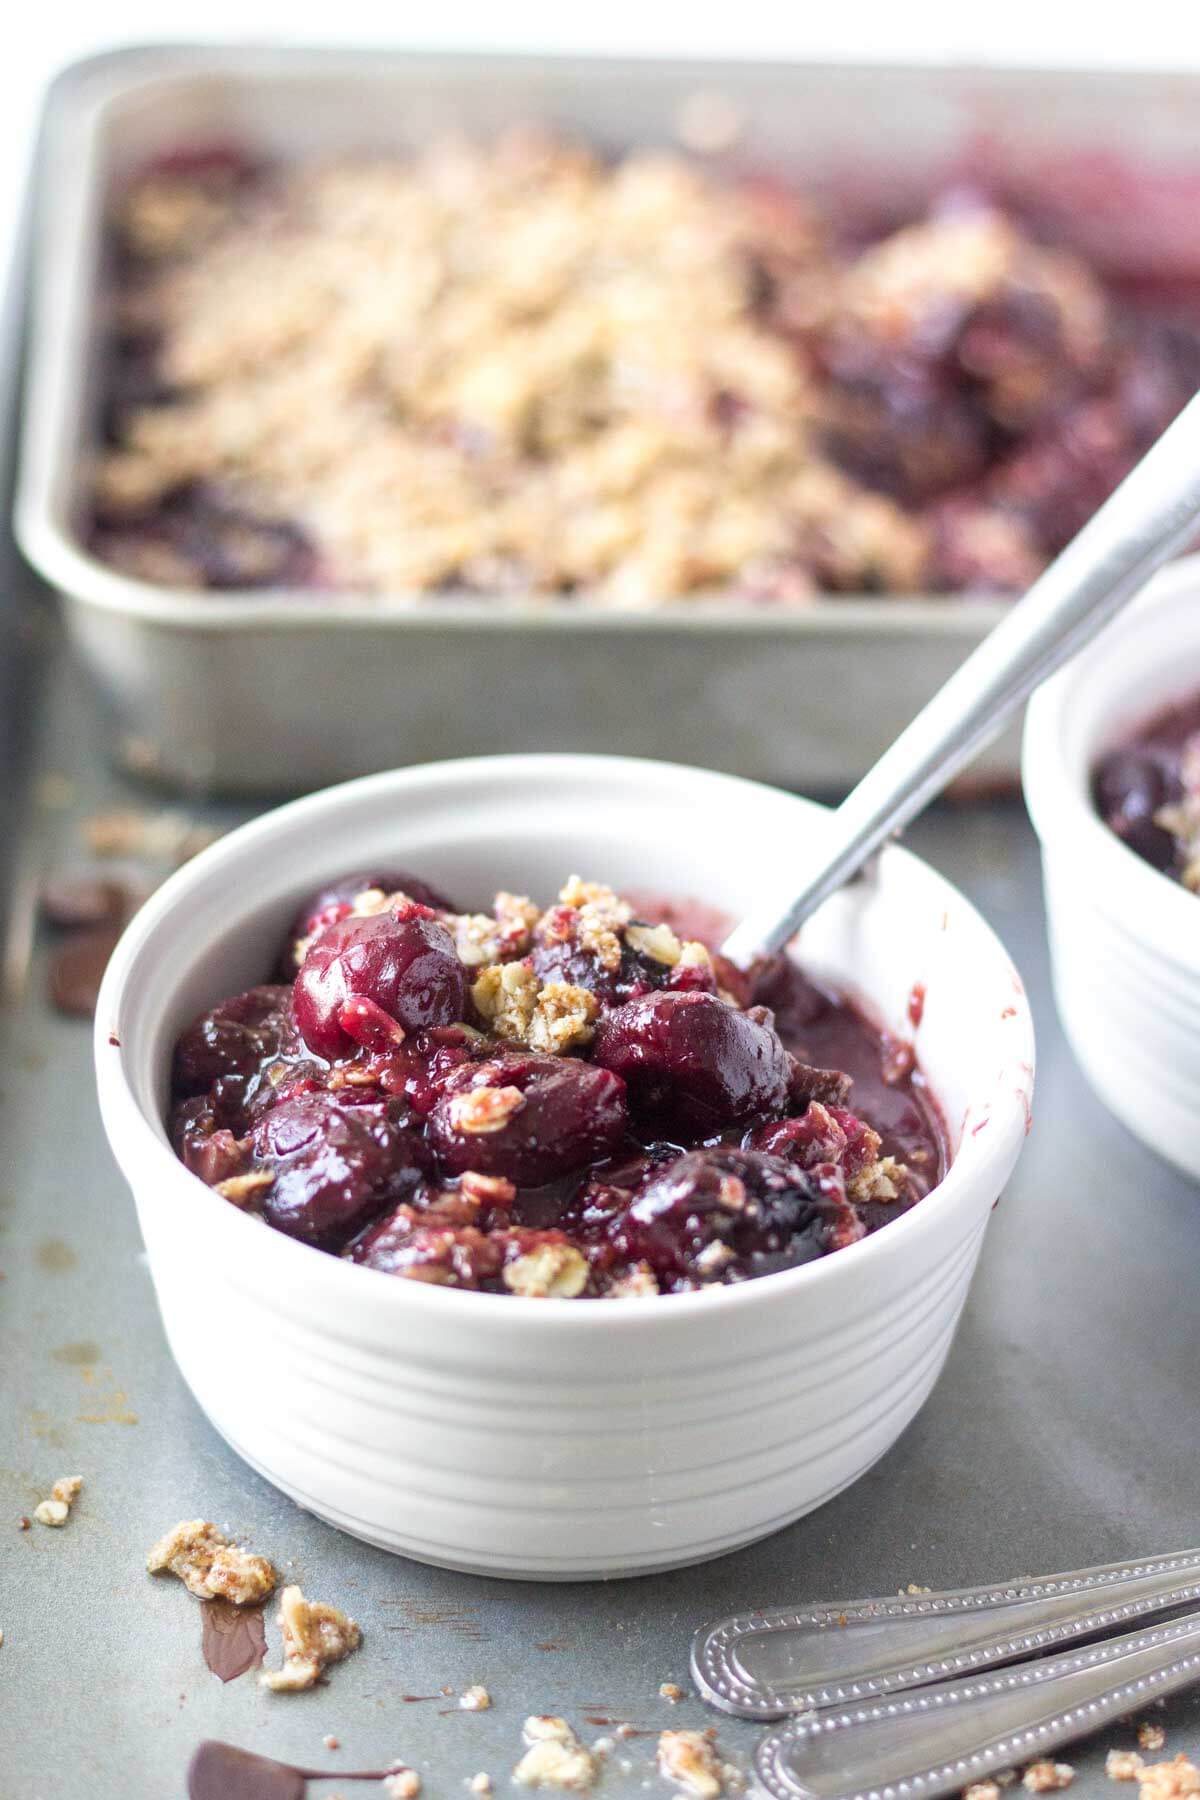 These easy cherry crisp recipe is made with frozen cherries and dark chocolate and topped with a gluten free oat crust. It's the perfect summer dessert recipe!